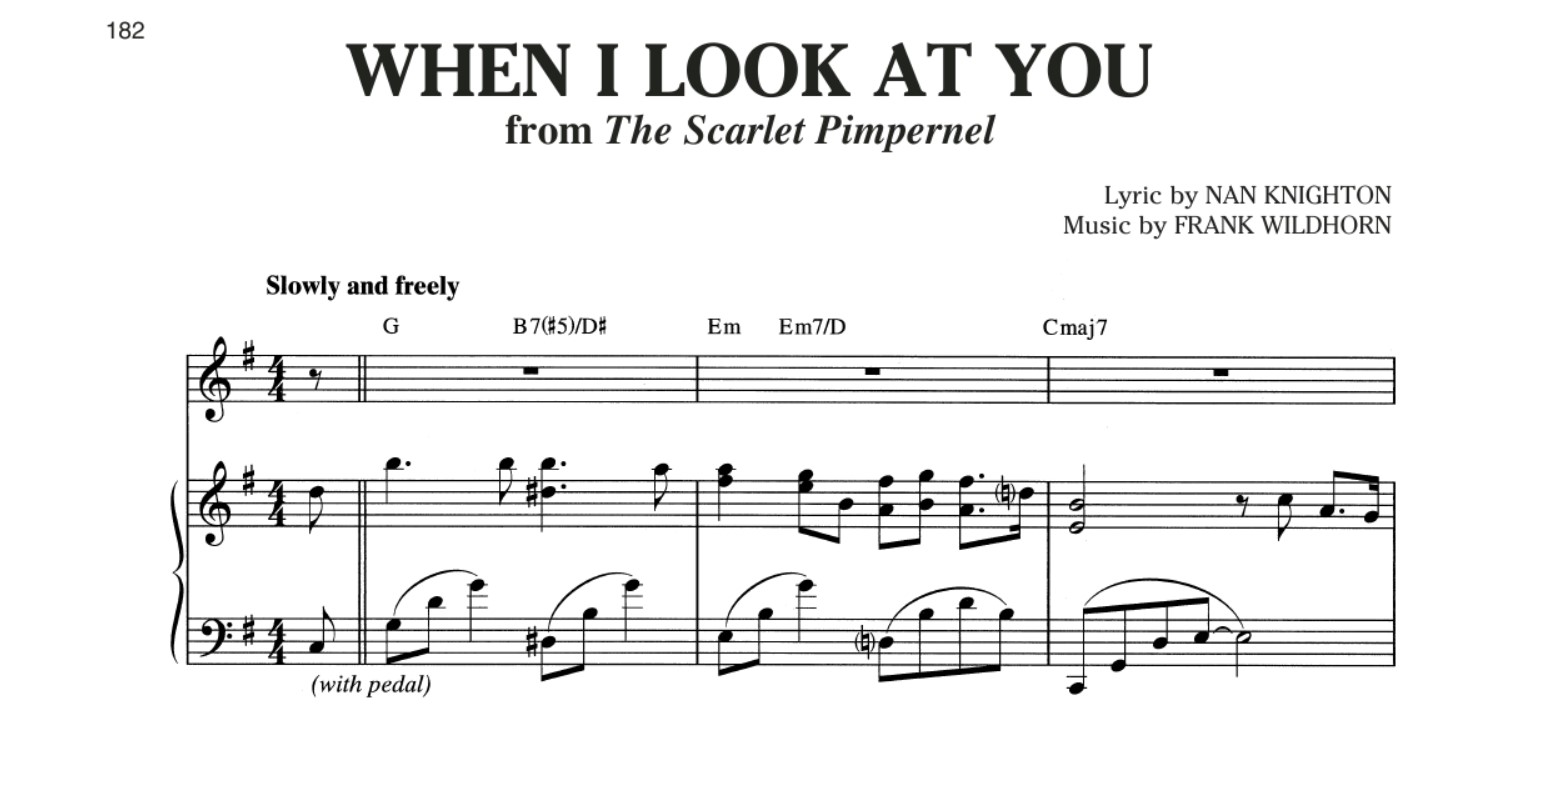 When I Look At You Sheet Music Scarlet Pimpernel